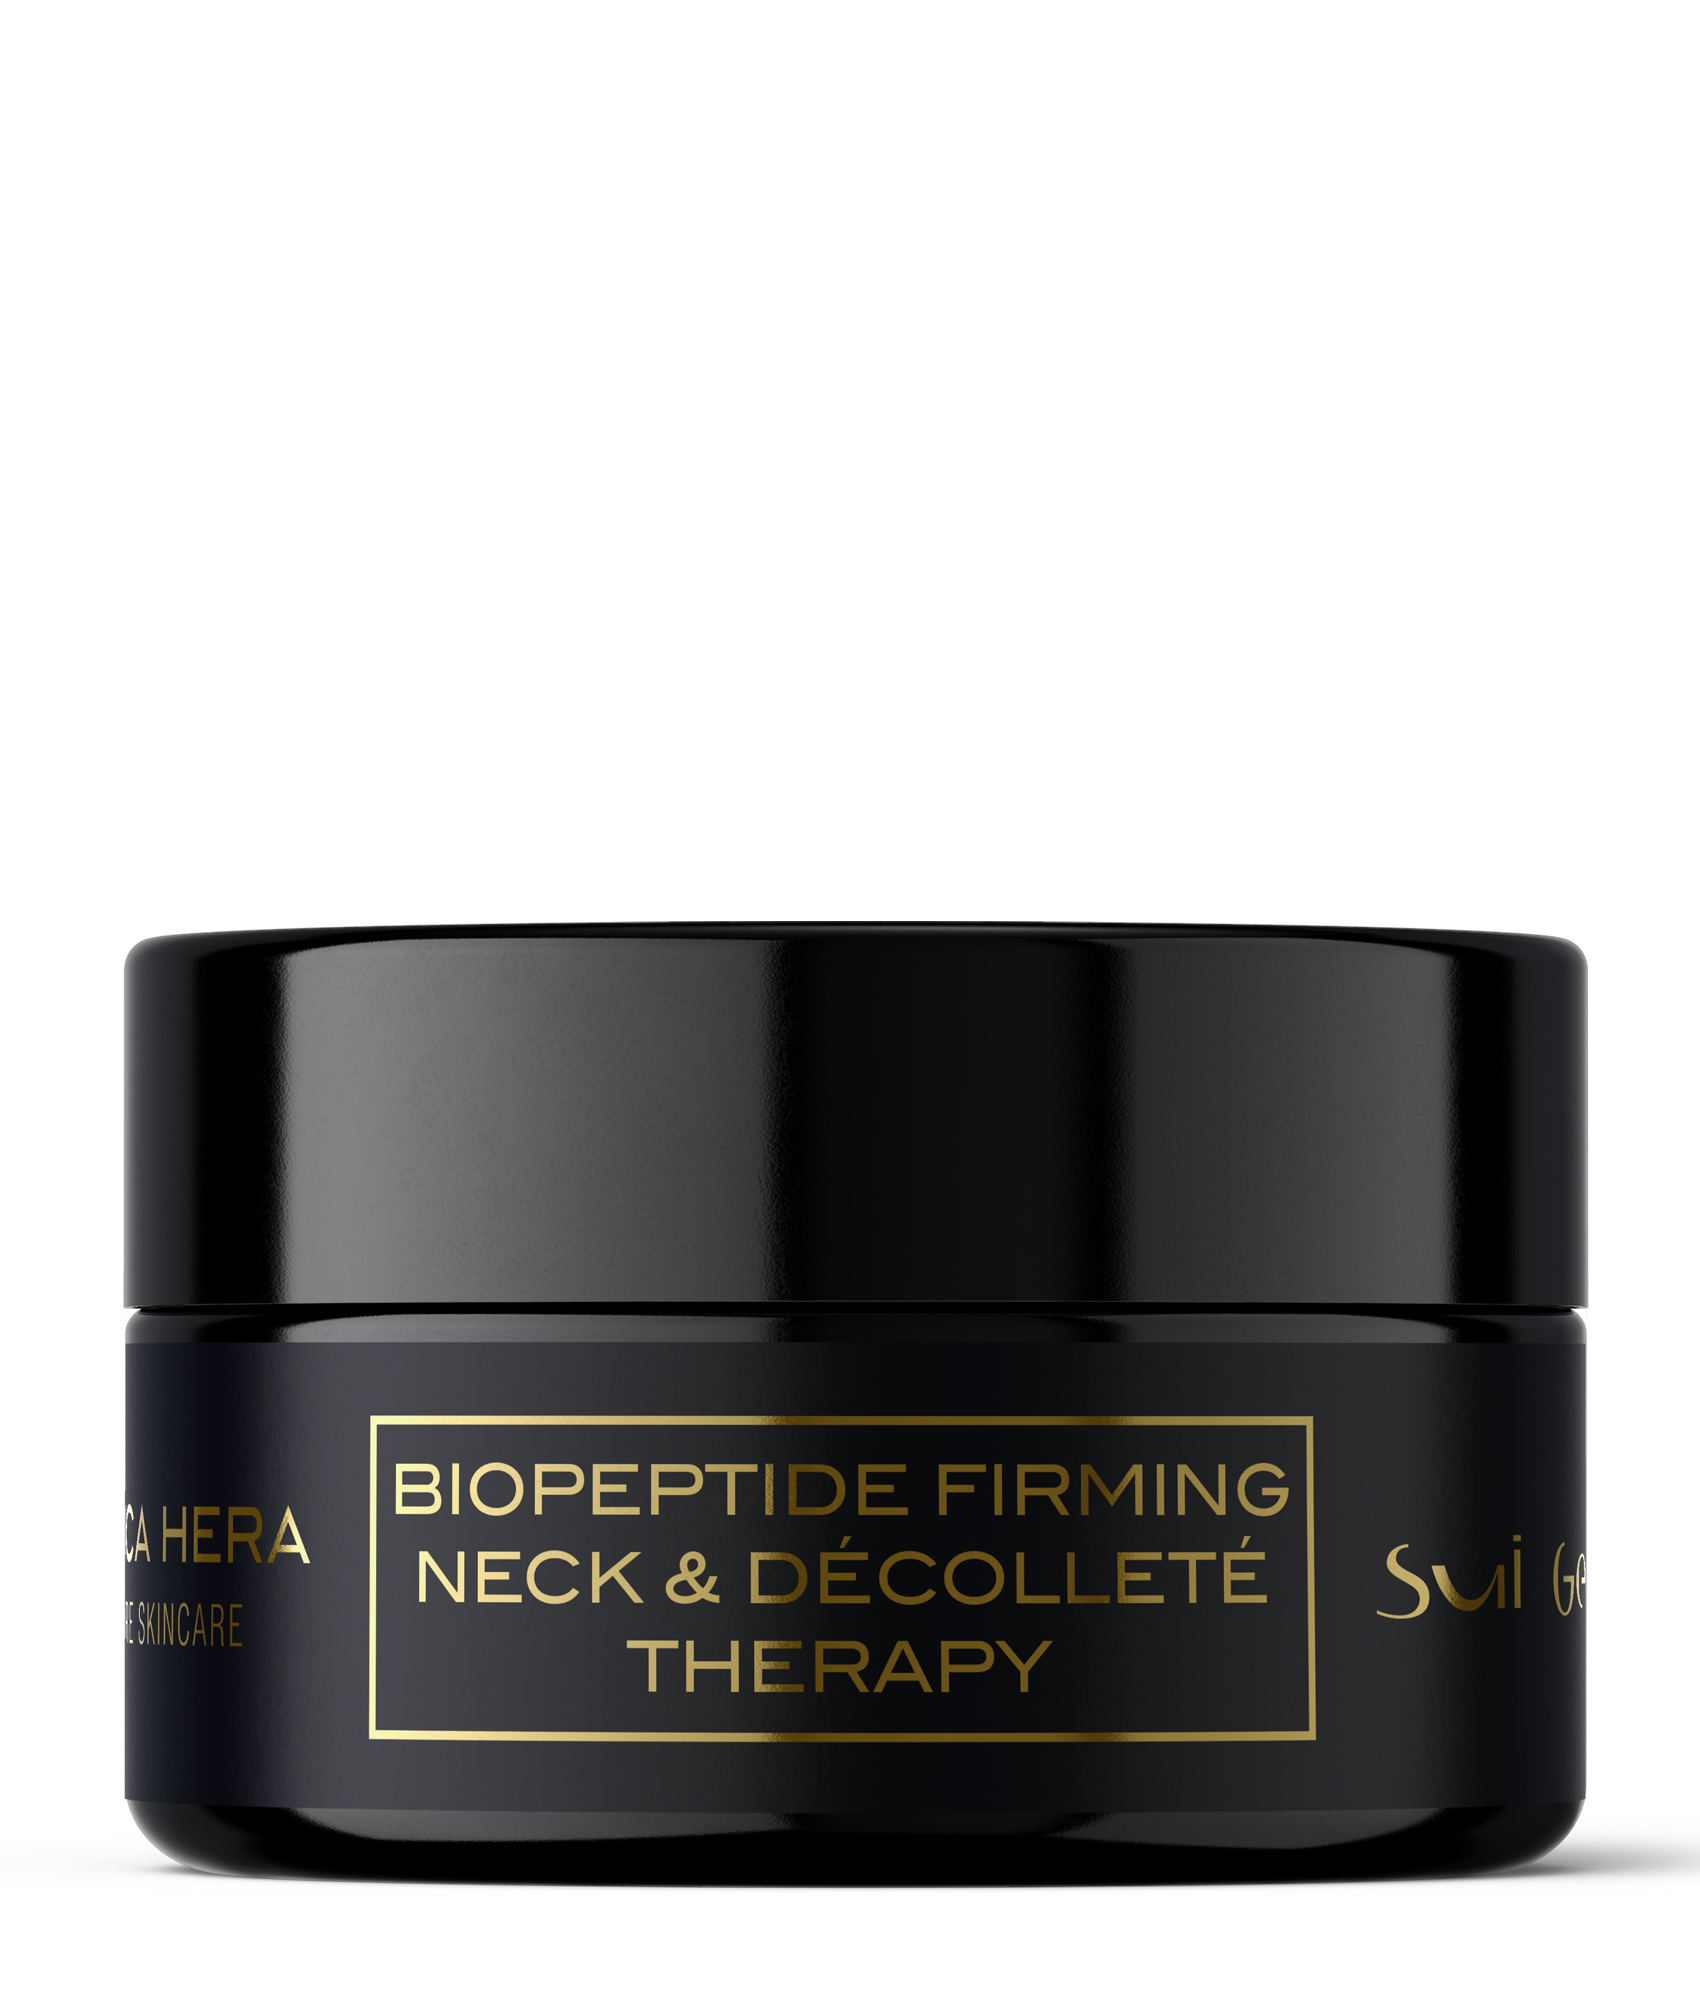 BIOPEPTIDE FIRMING NECK & DECOLLETE THERAPY